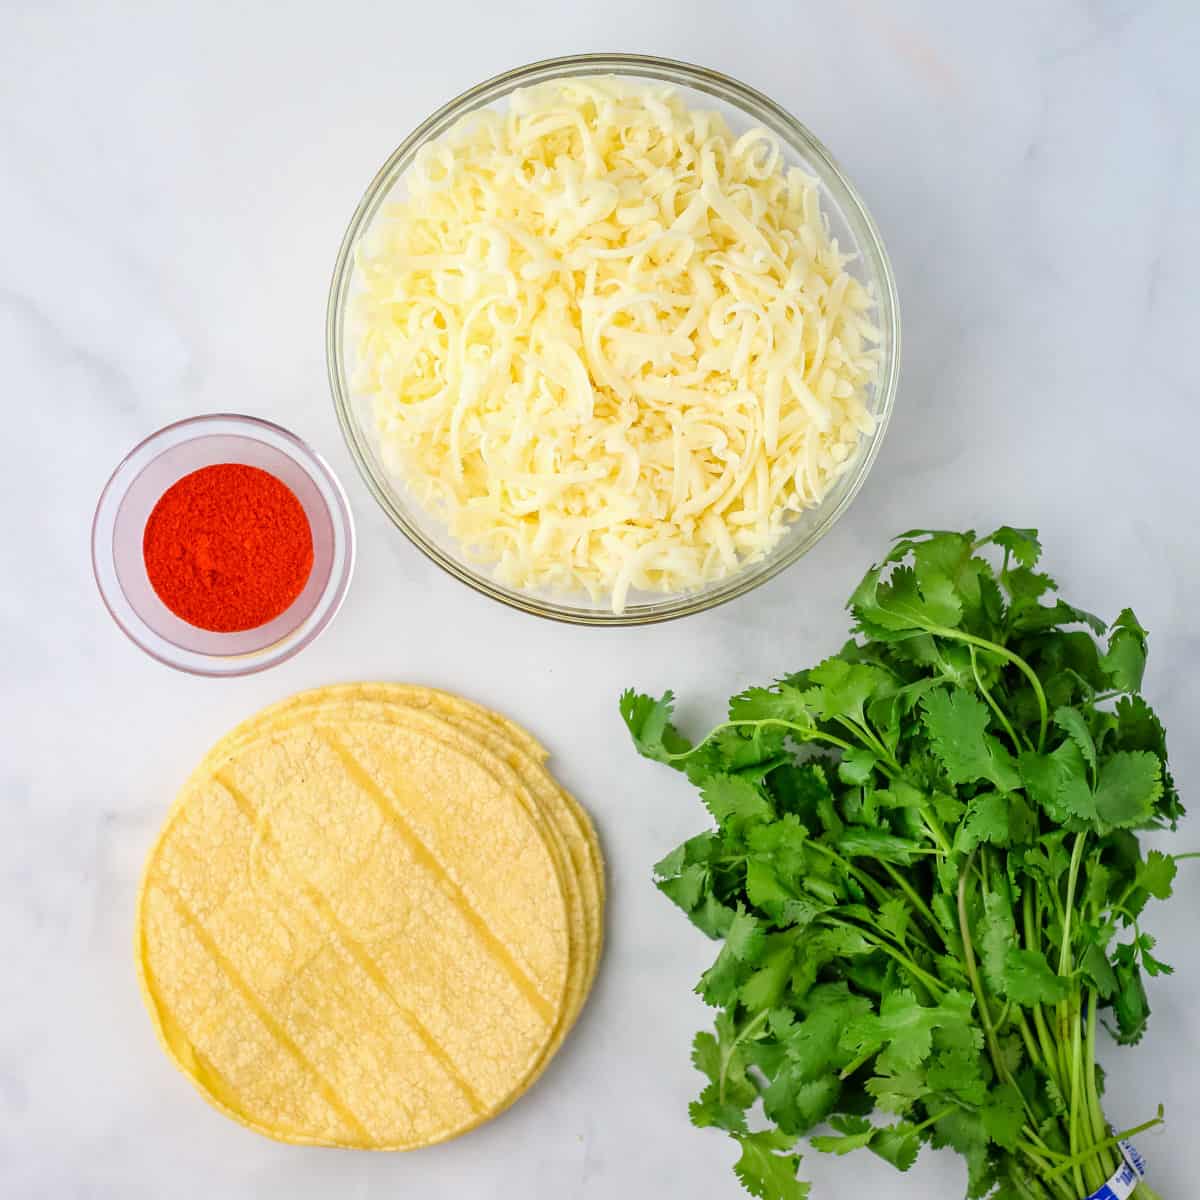 Ingredients for assembling the chicken enchilada casserole: corn tortillas, Monterey jack cheese, paprika, and cilantro.